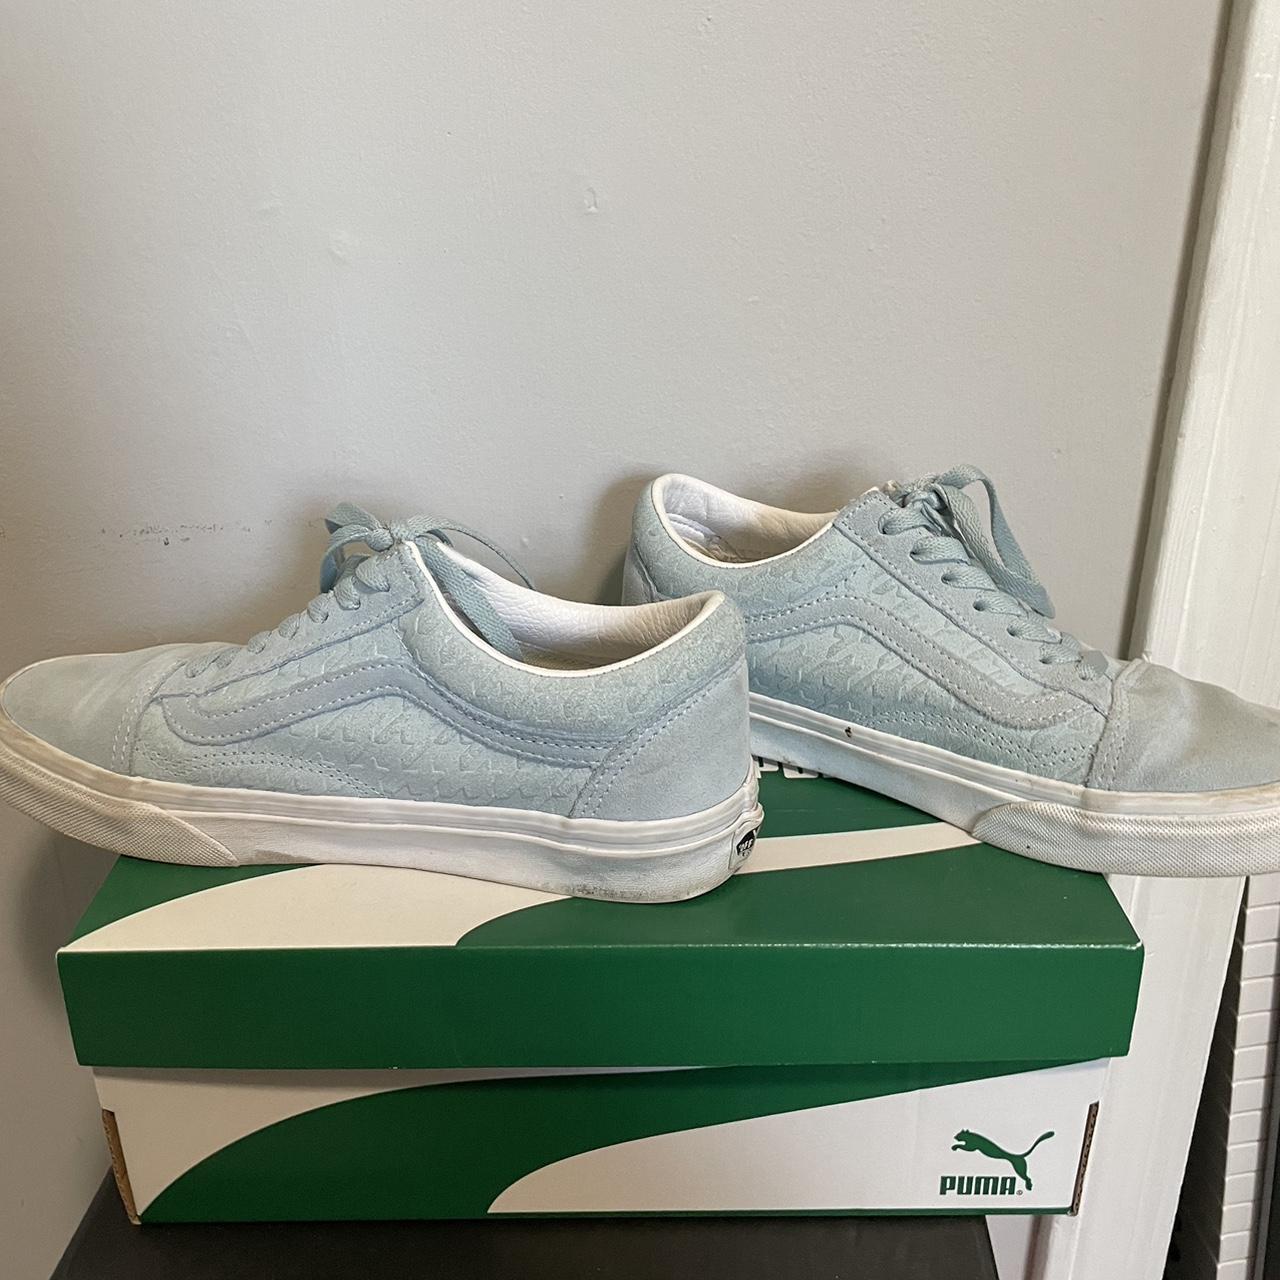 Vans Women's Blue and White Trainers | Depop